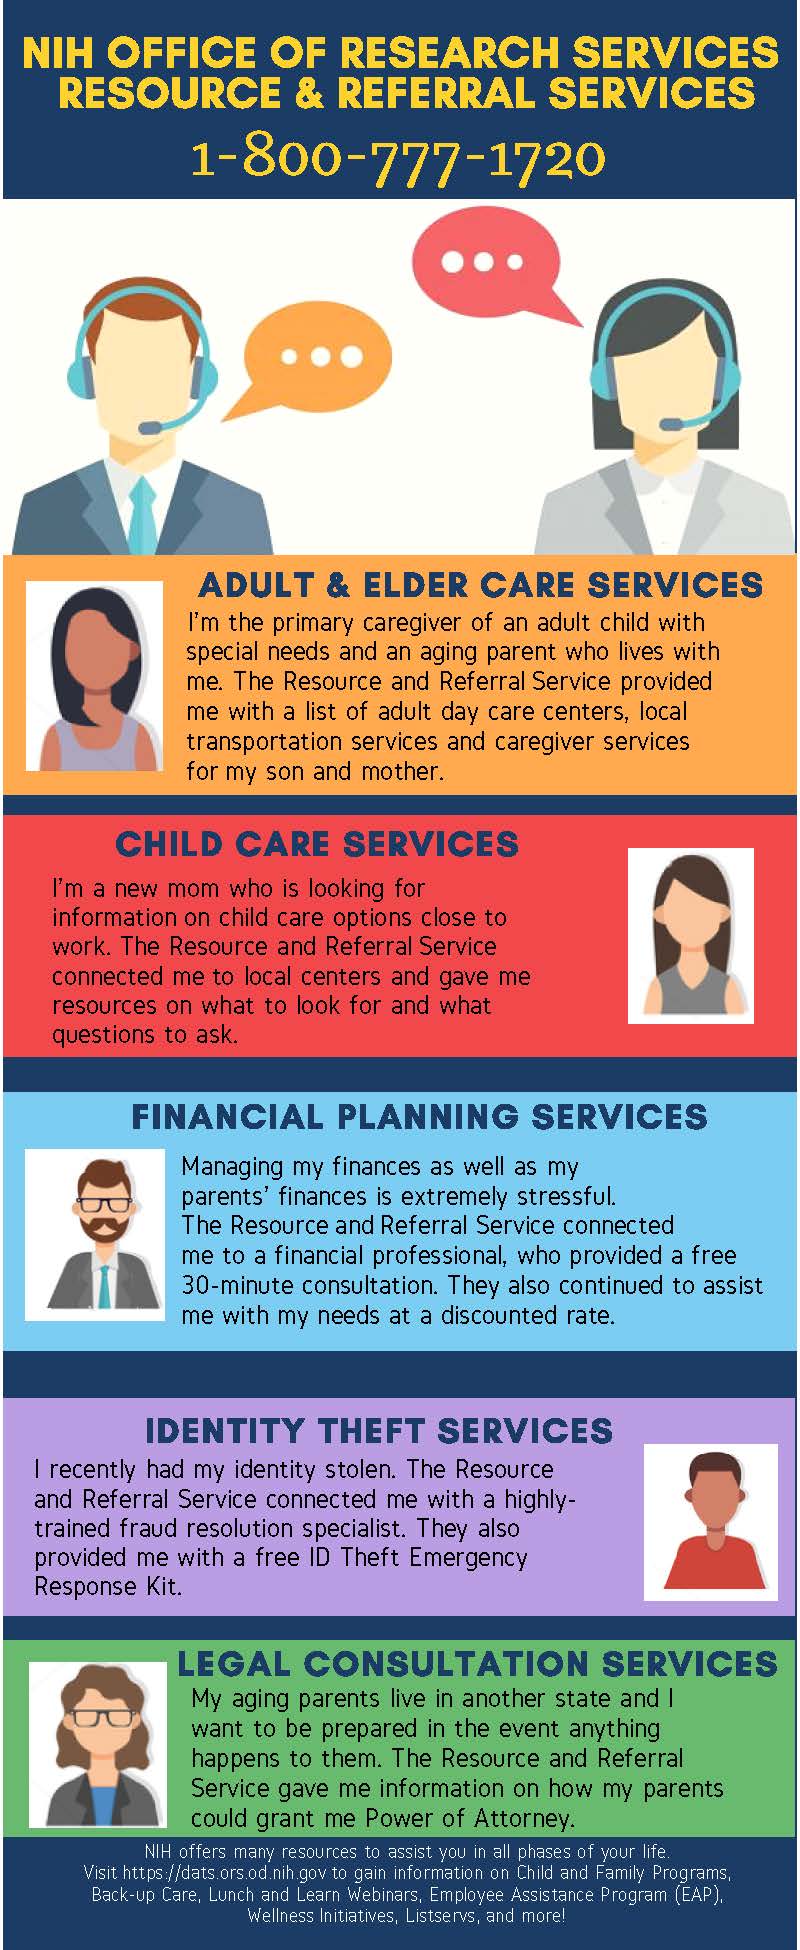 NIH Resource and Referral Services Infographic